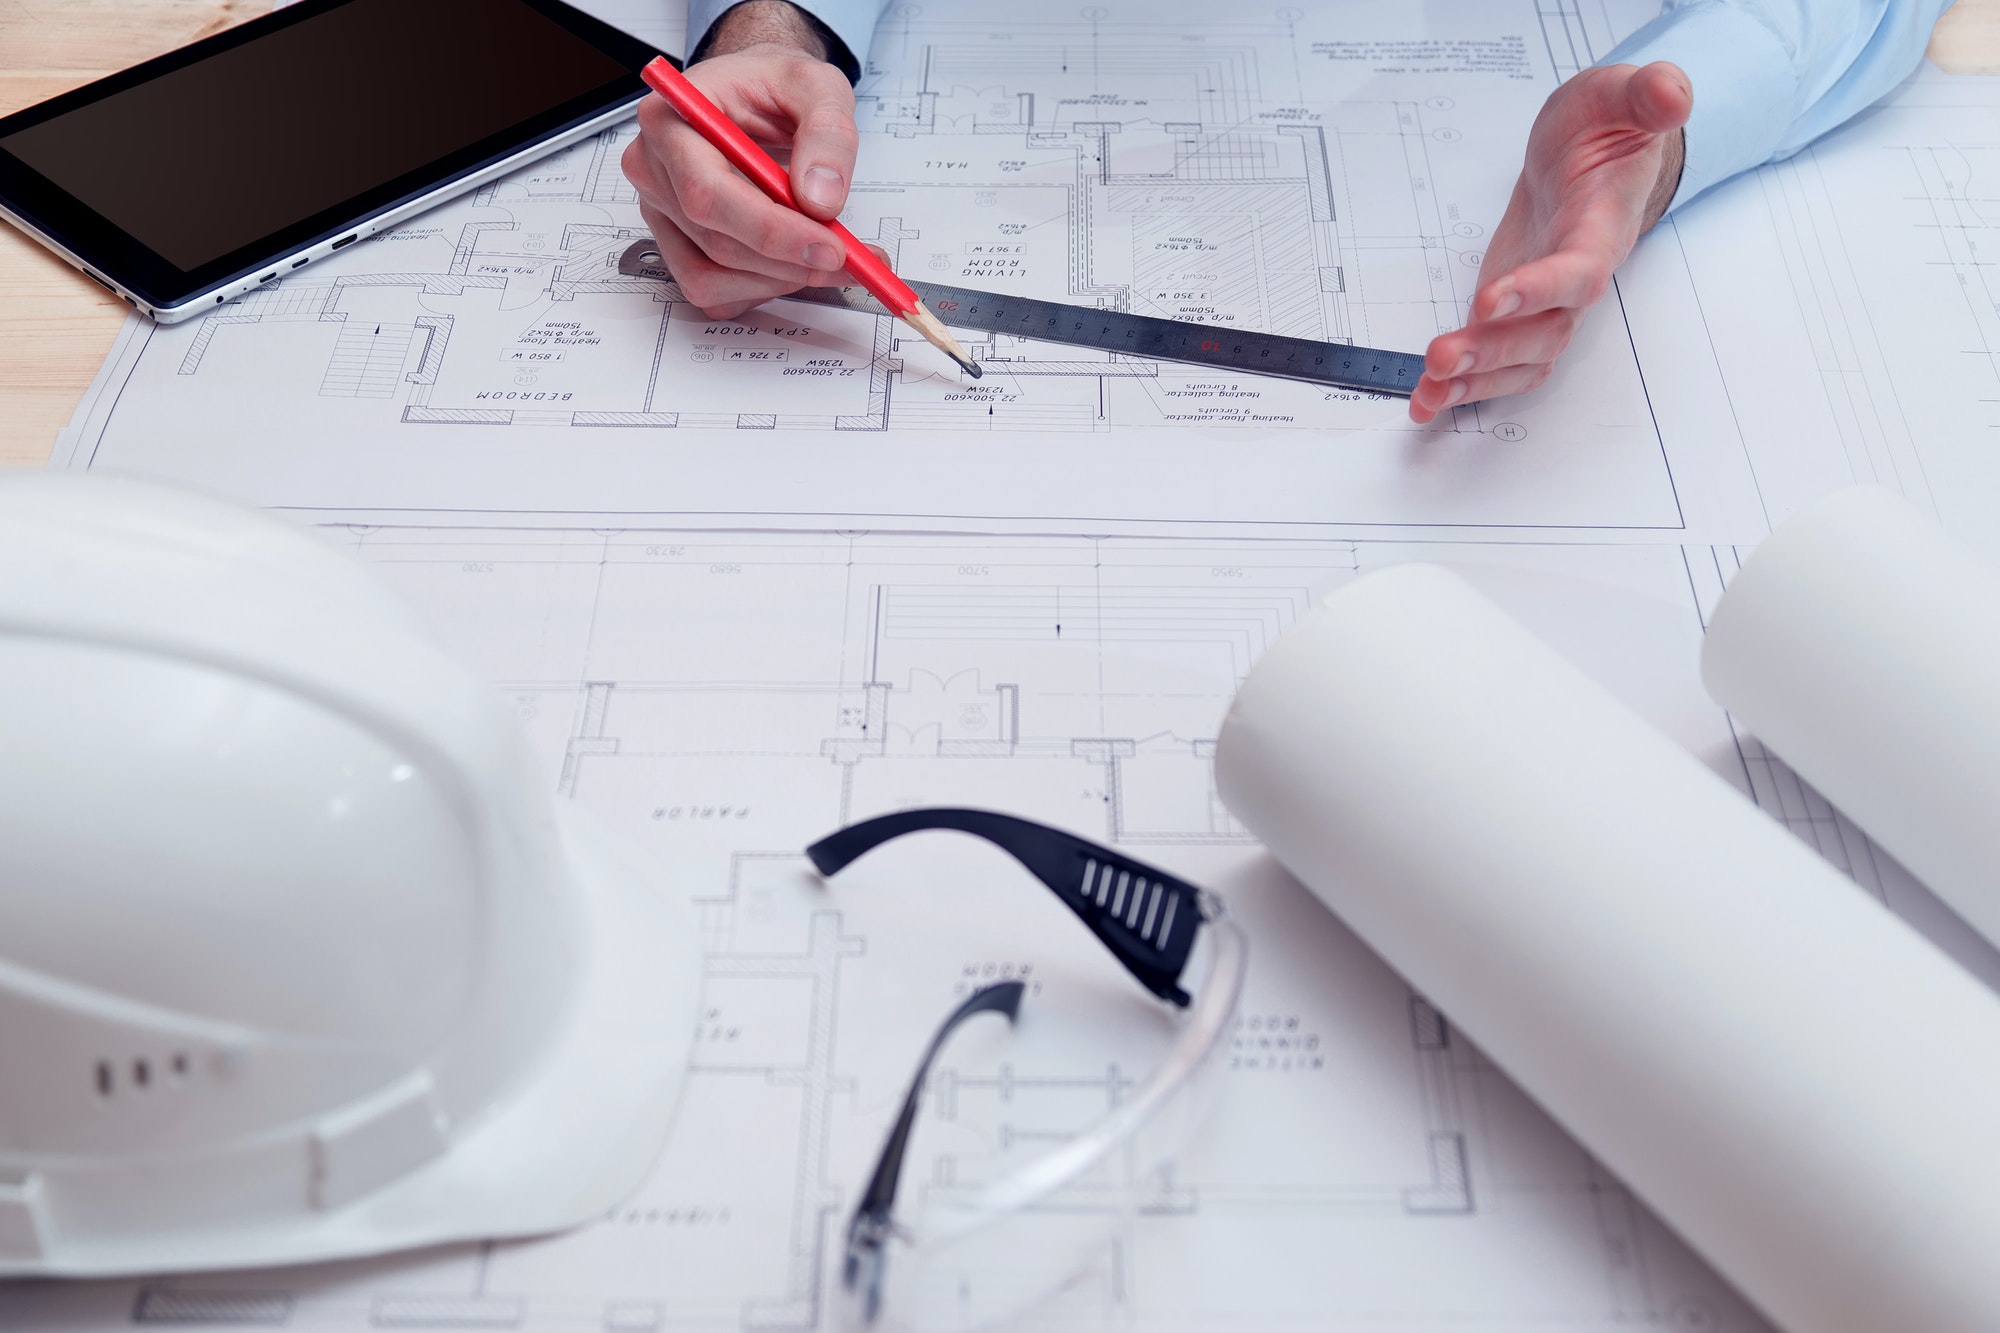 Chief engineer or architect works with building drawings